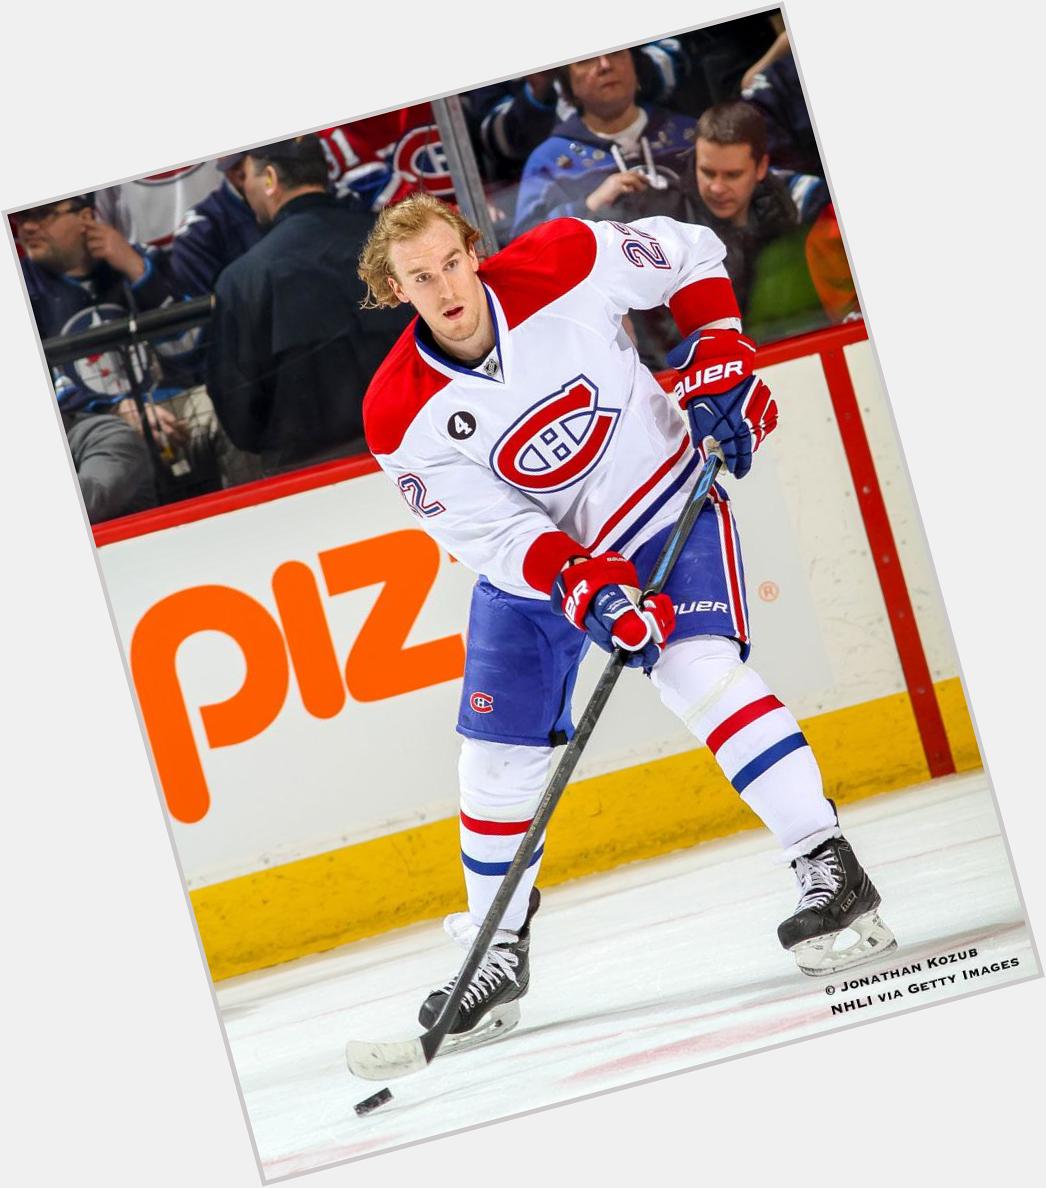 A happy 27th birthday to Dale Weise 